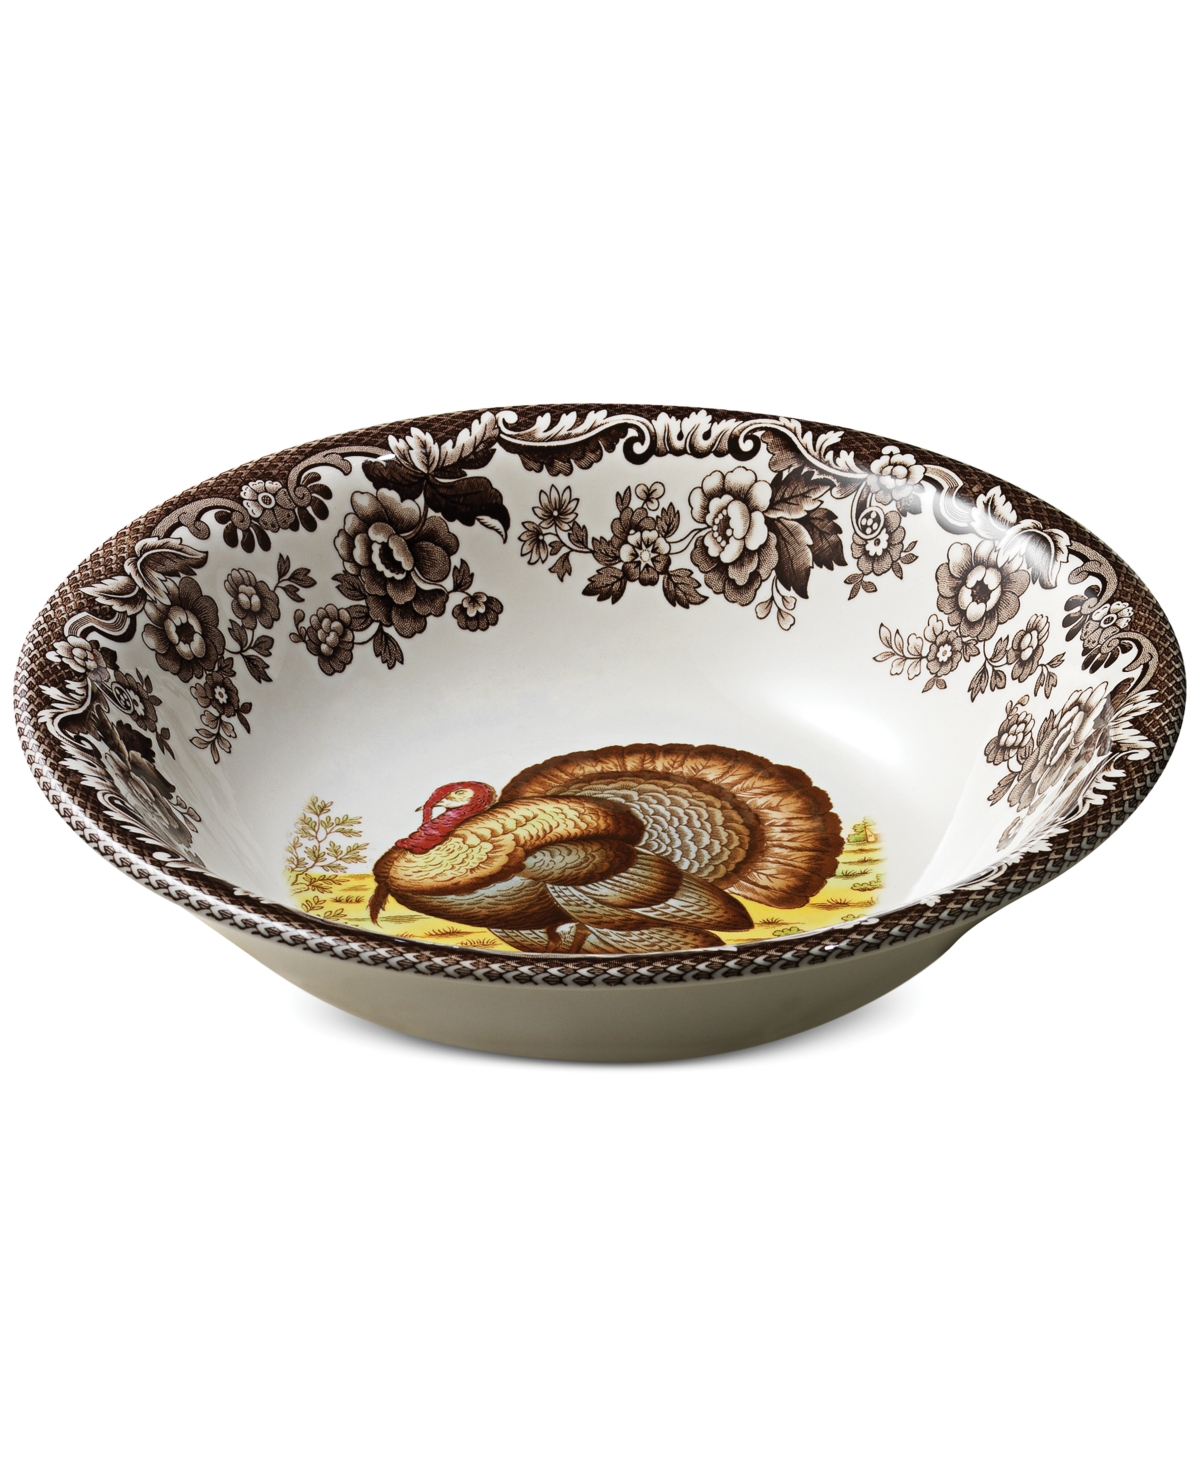 Woodland Turkey Ascot Cereal Bowl